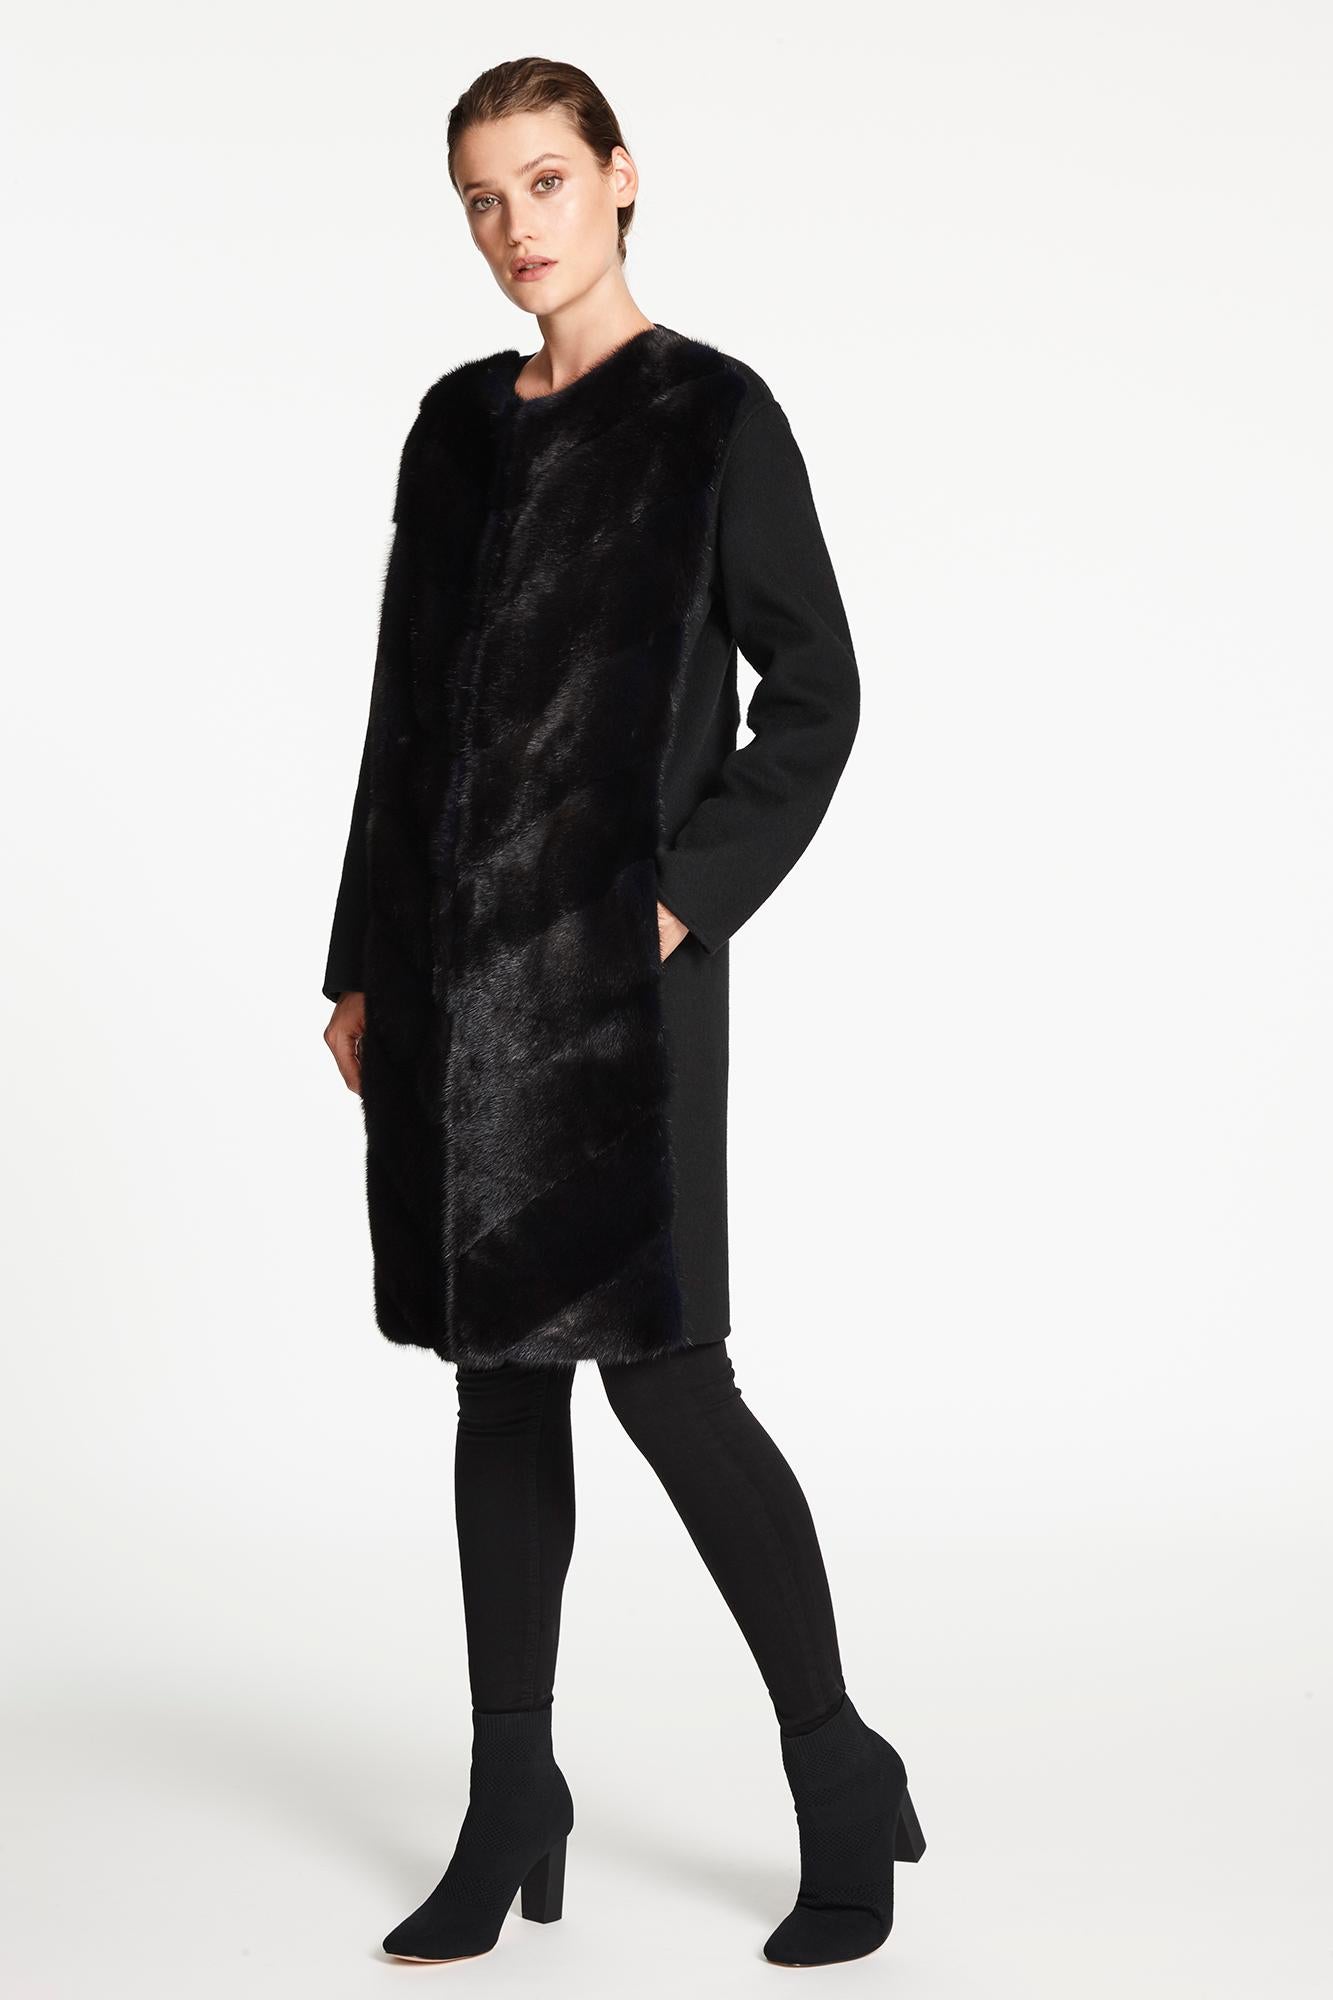 Brand New Collarless Coat Cashmere and in Navy Black Mink Fur 2